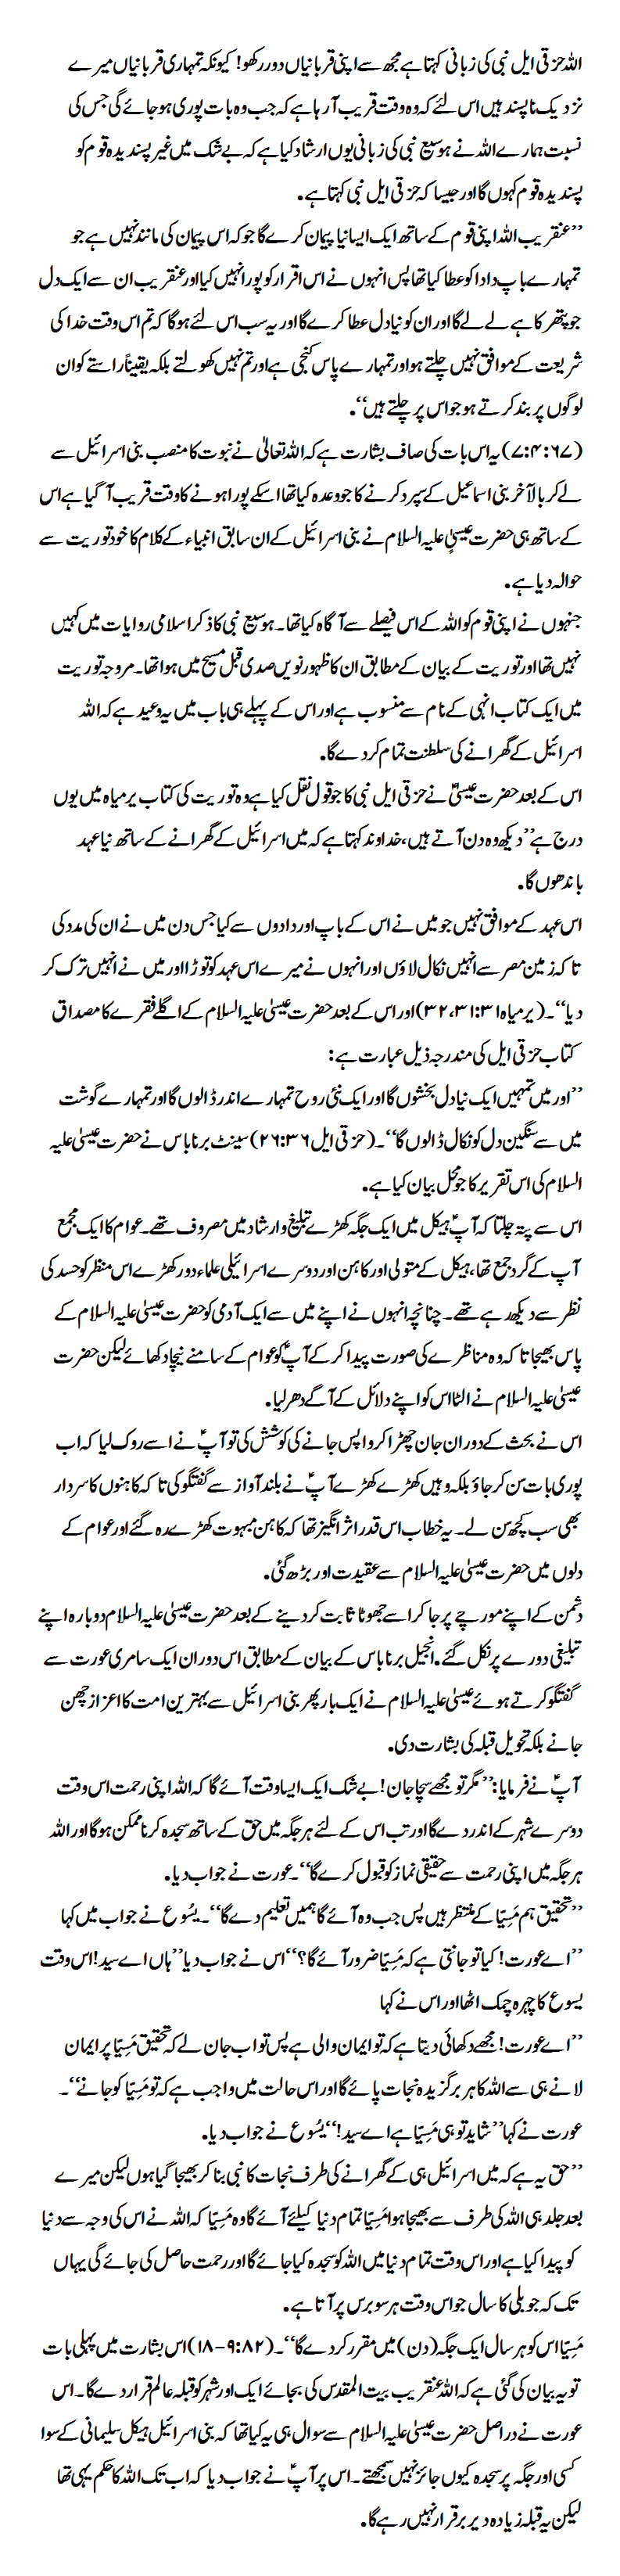 How predictions were made thousands of years ago In Urdu